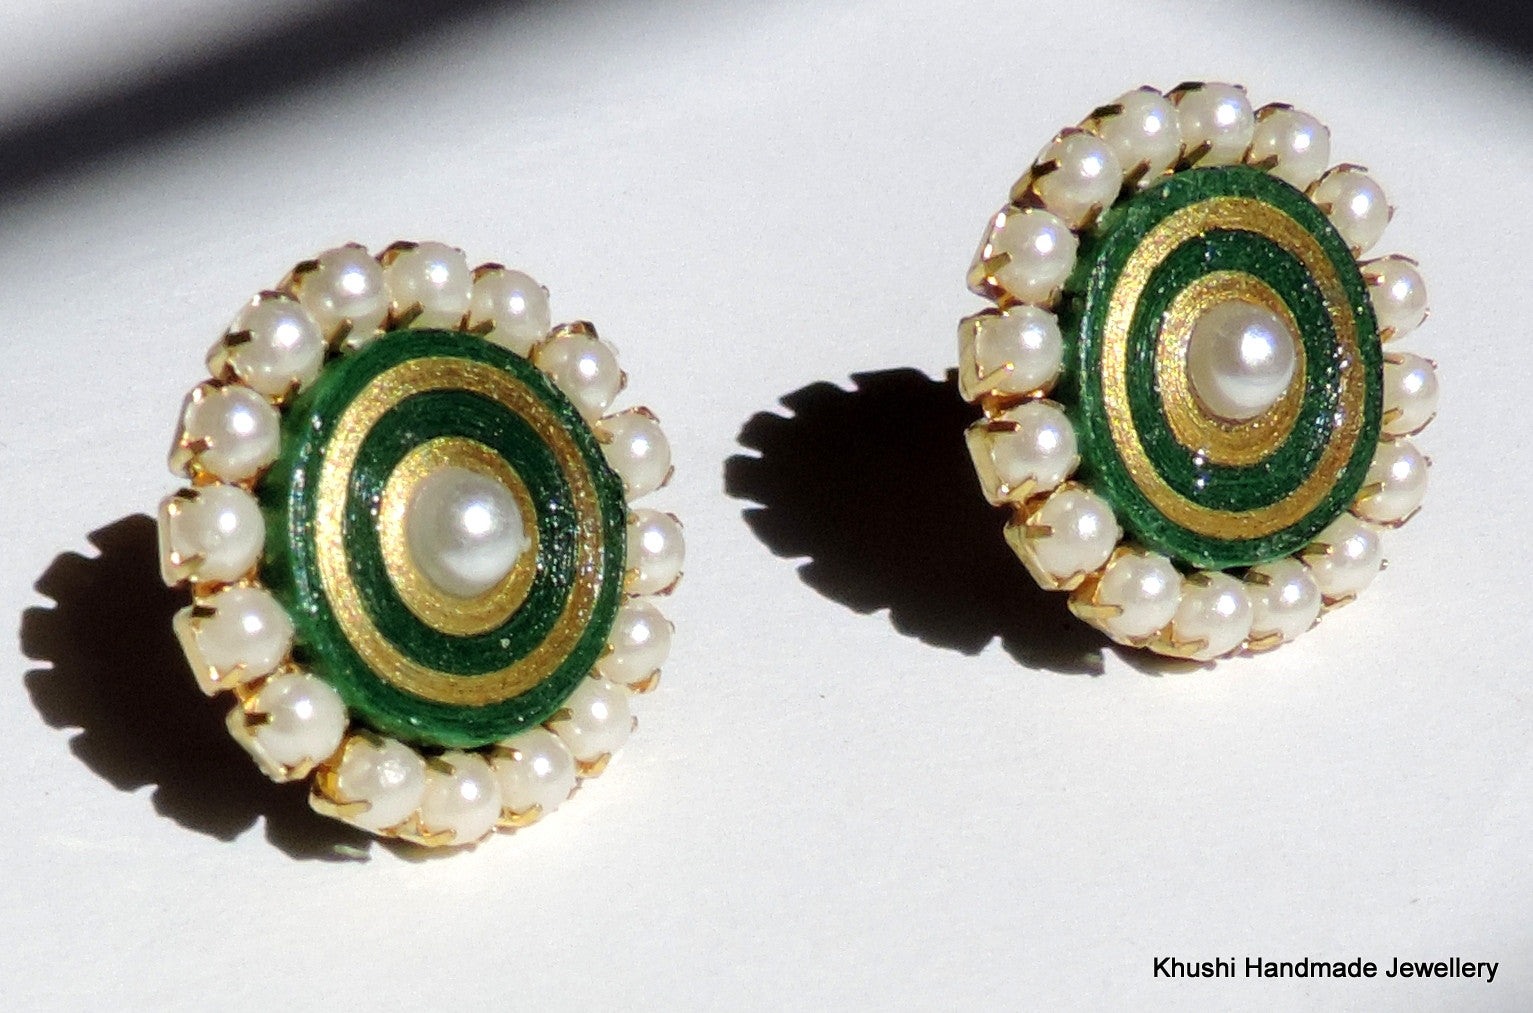 Green studs with pearl lining - Khushi Handmade Jewellery